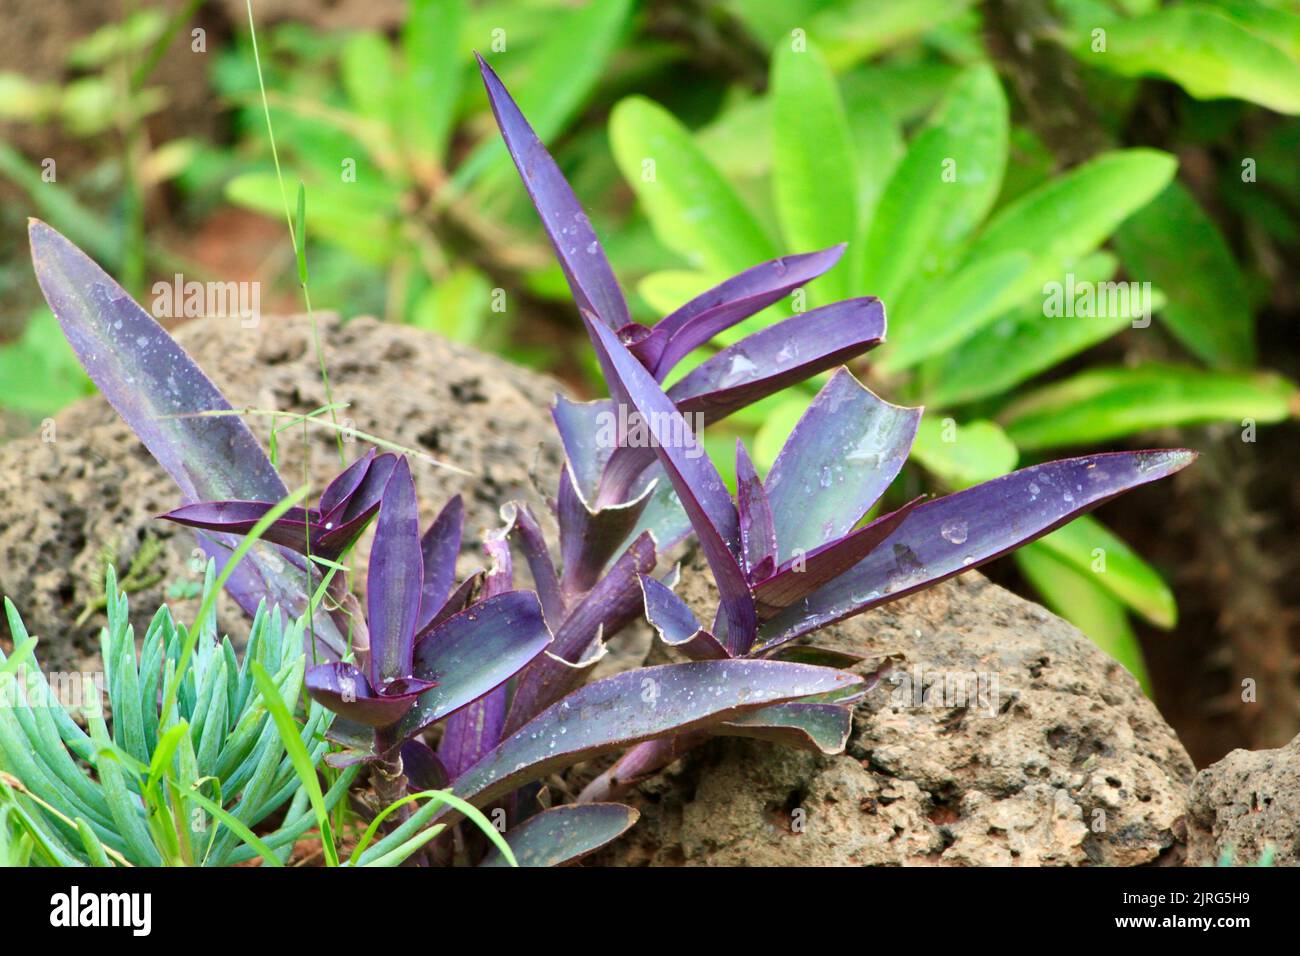 The close-up view of a Tradescantia pallida plant growing in a wild botanical area Stock Photo